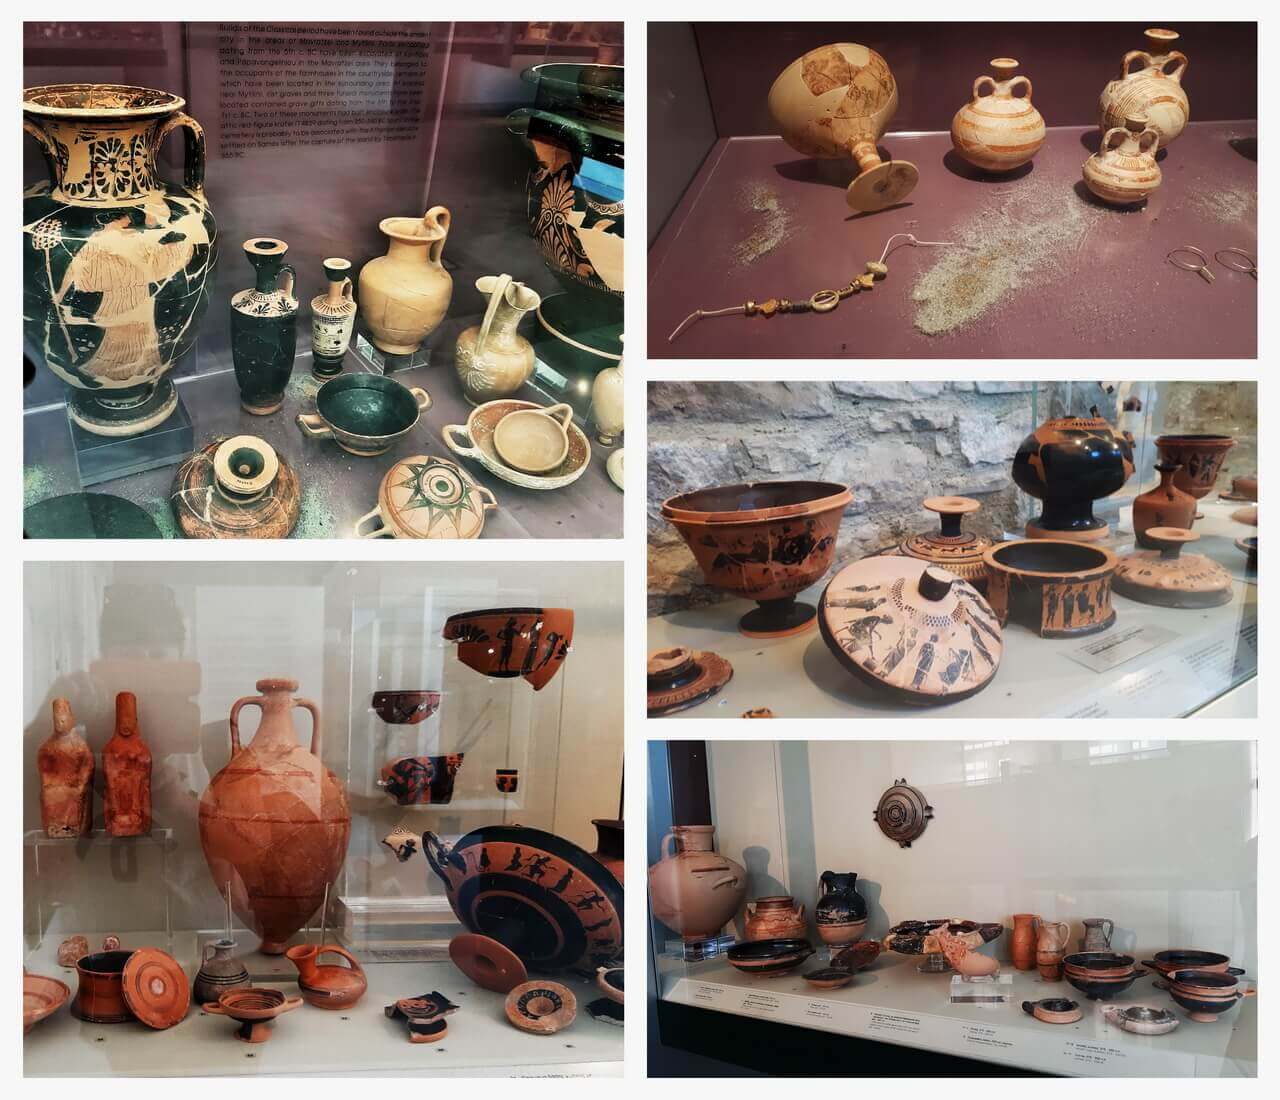 The funeral pottery, Samos